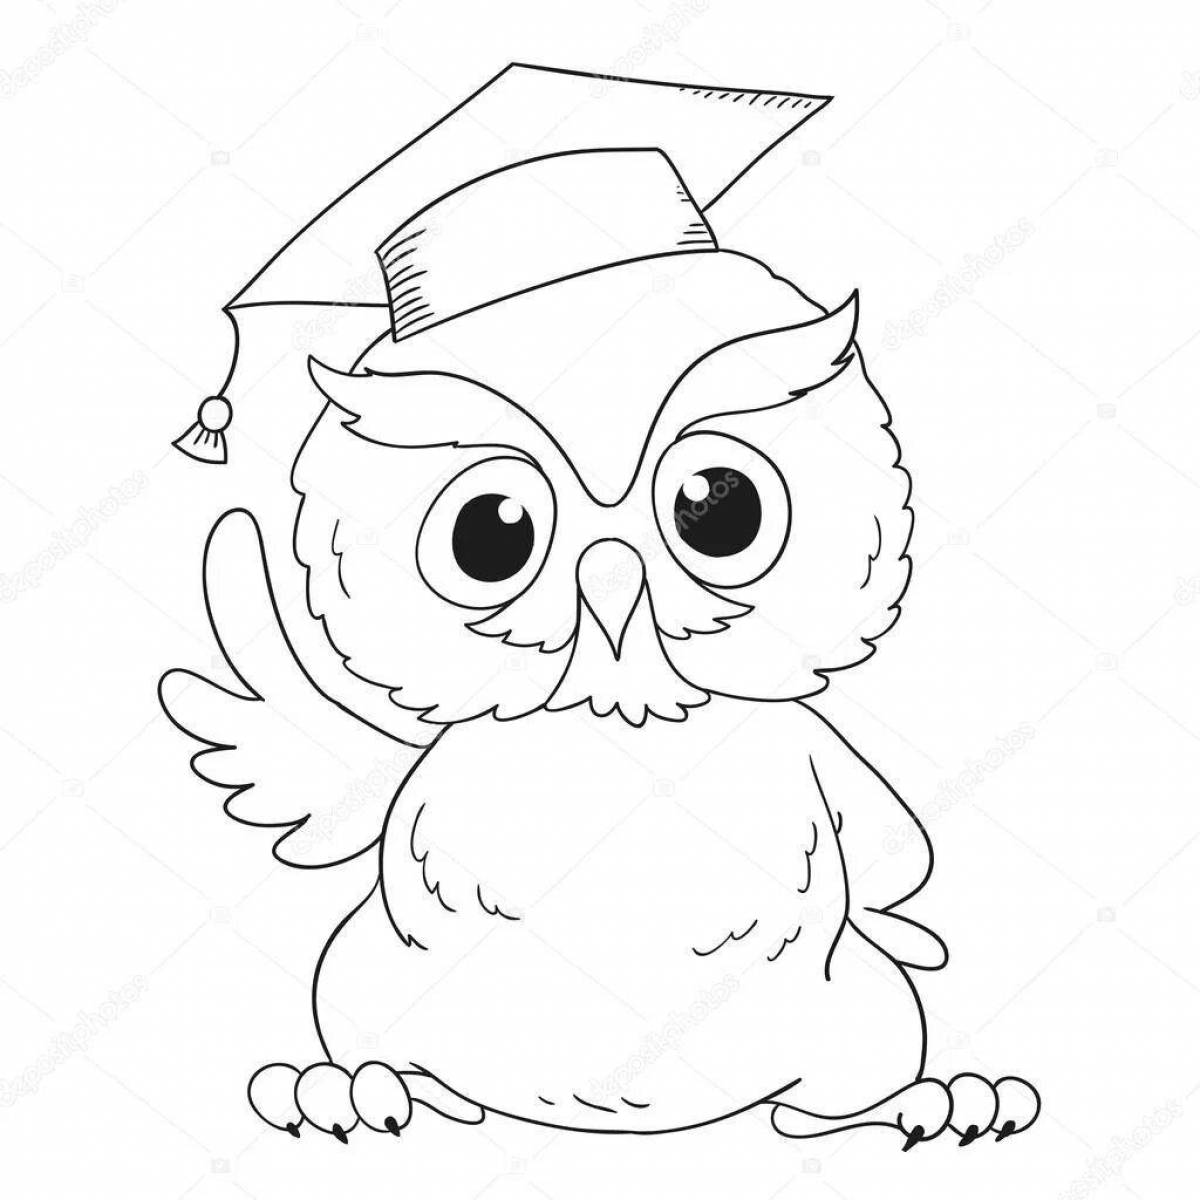 Royal smart owl coloring page